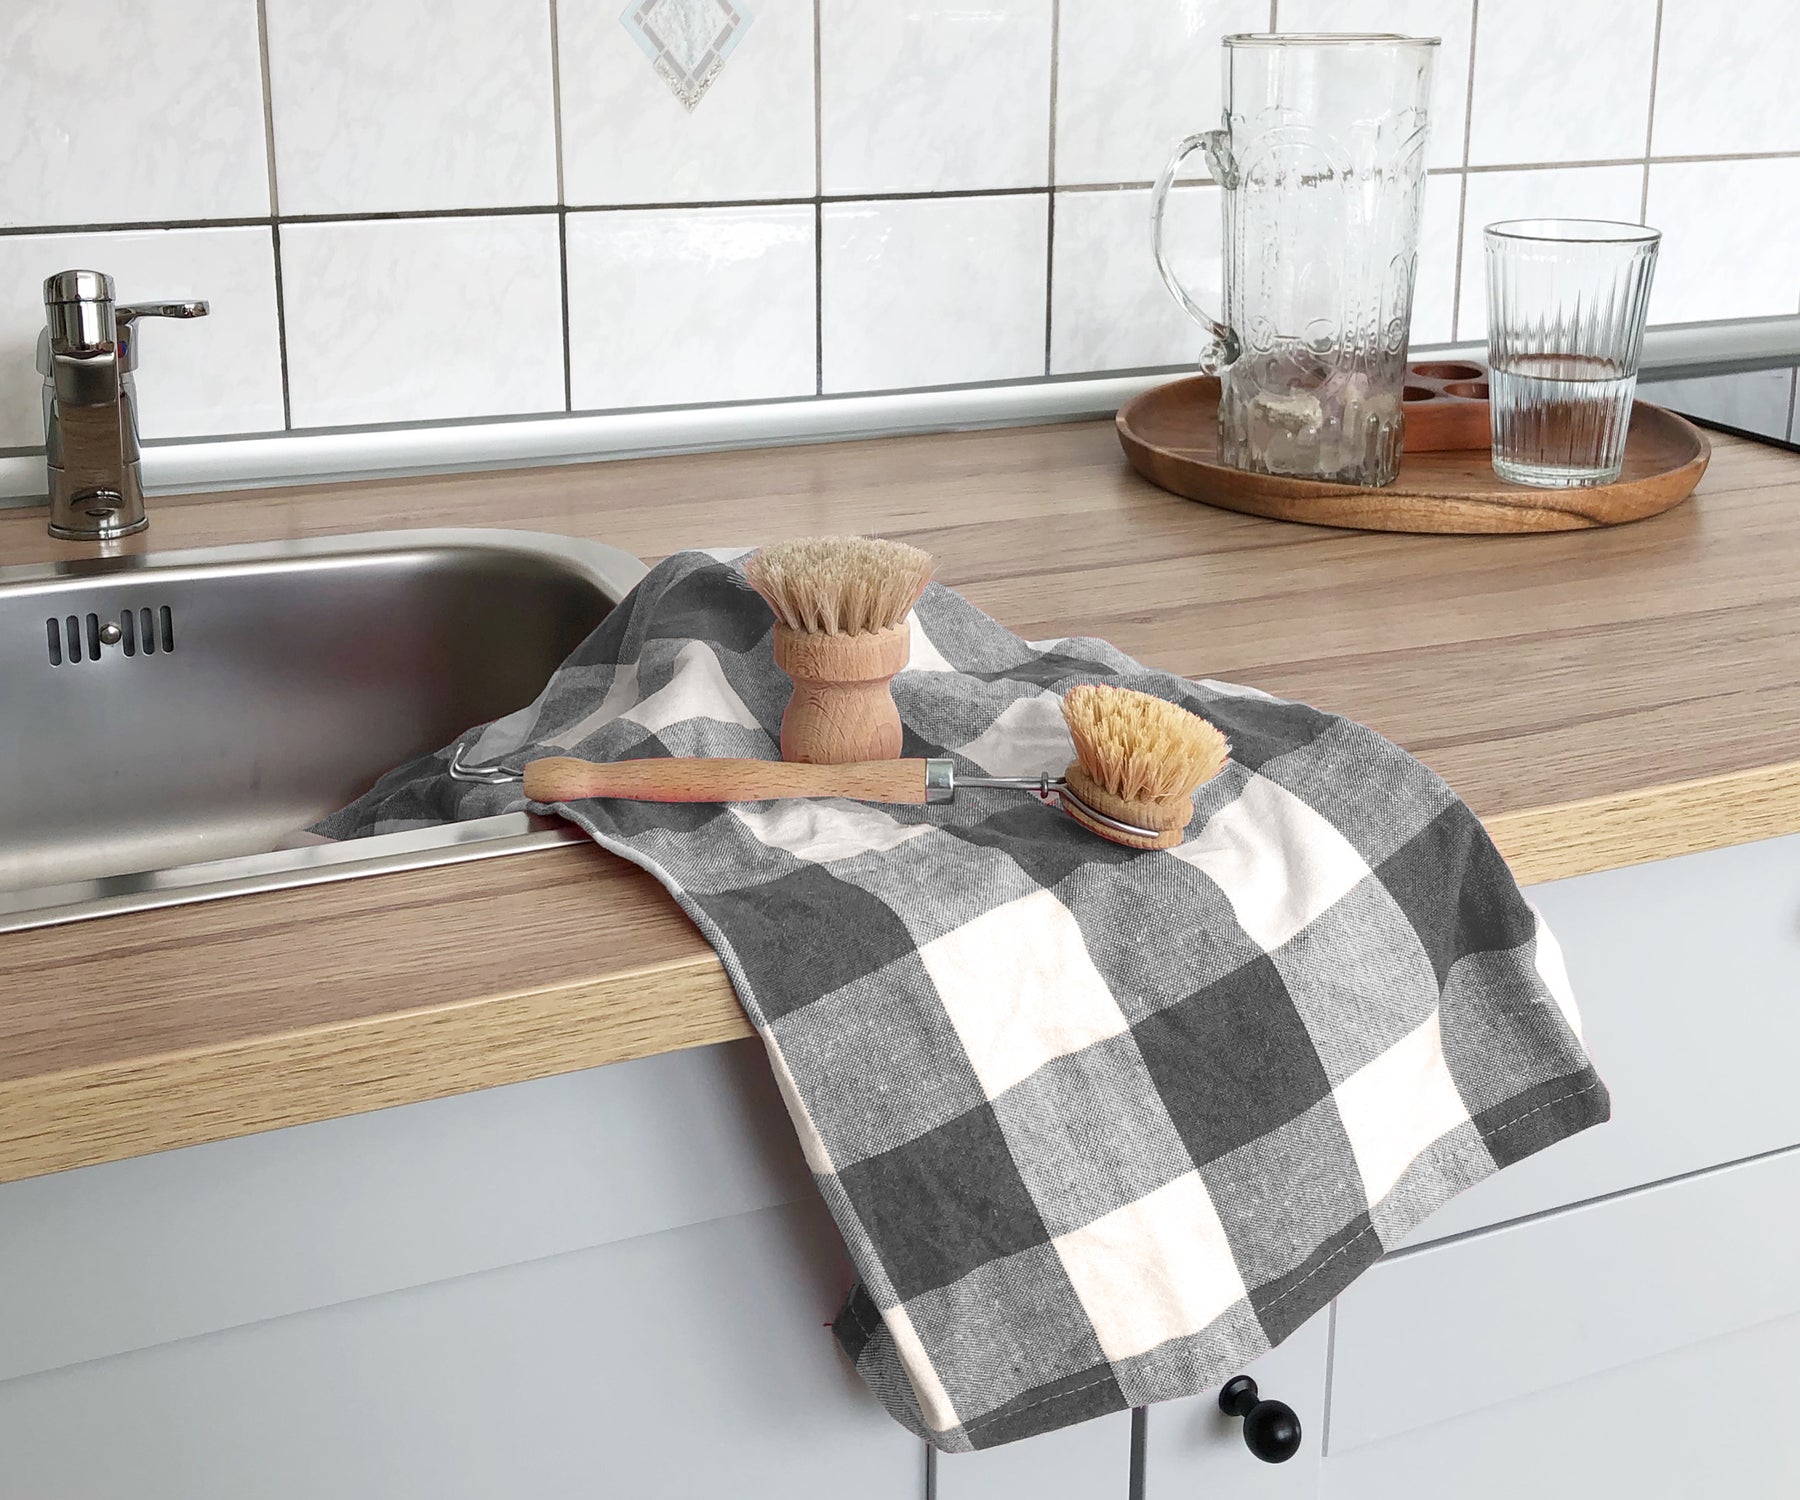 These grey waffle weave kitchen towels are a versatile and absorbent choice for drying dishes, wiping counters, or cleaning up spills.